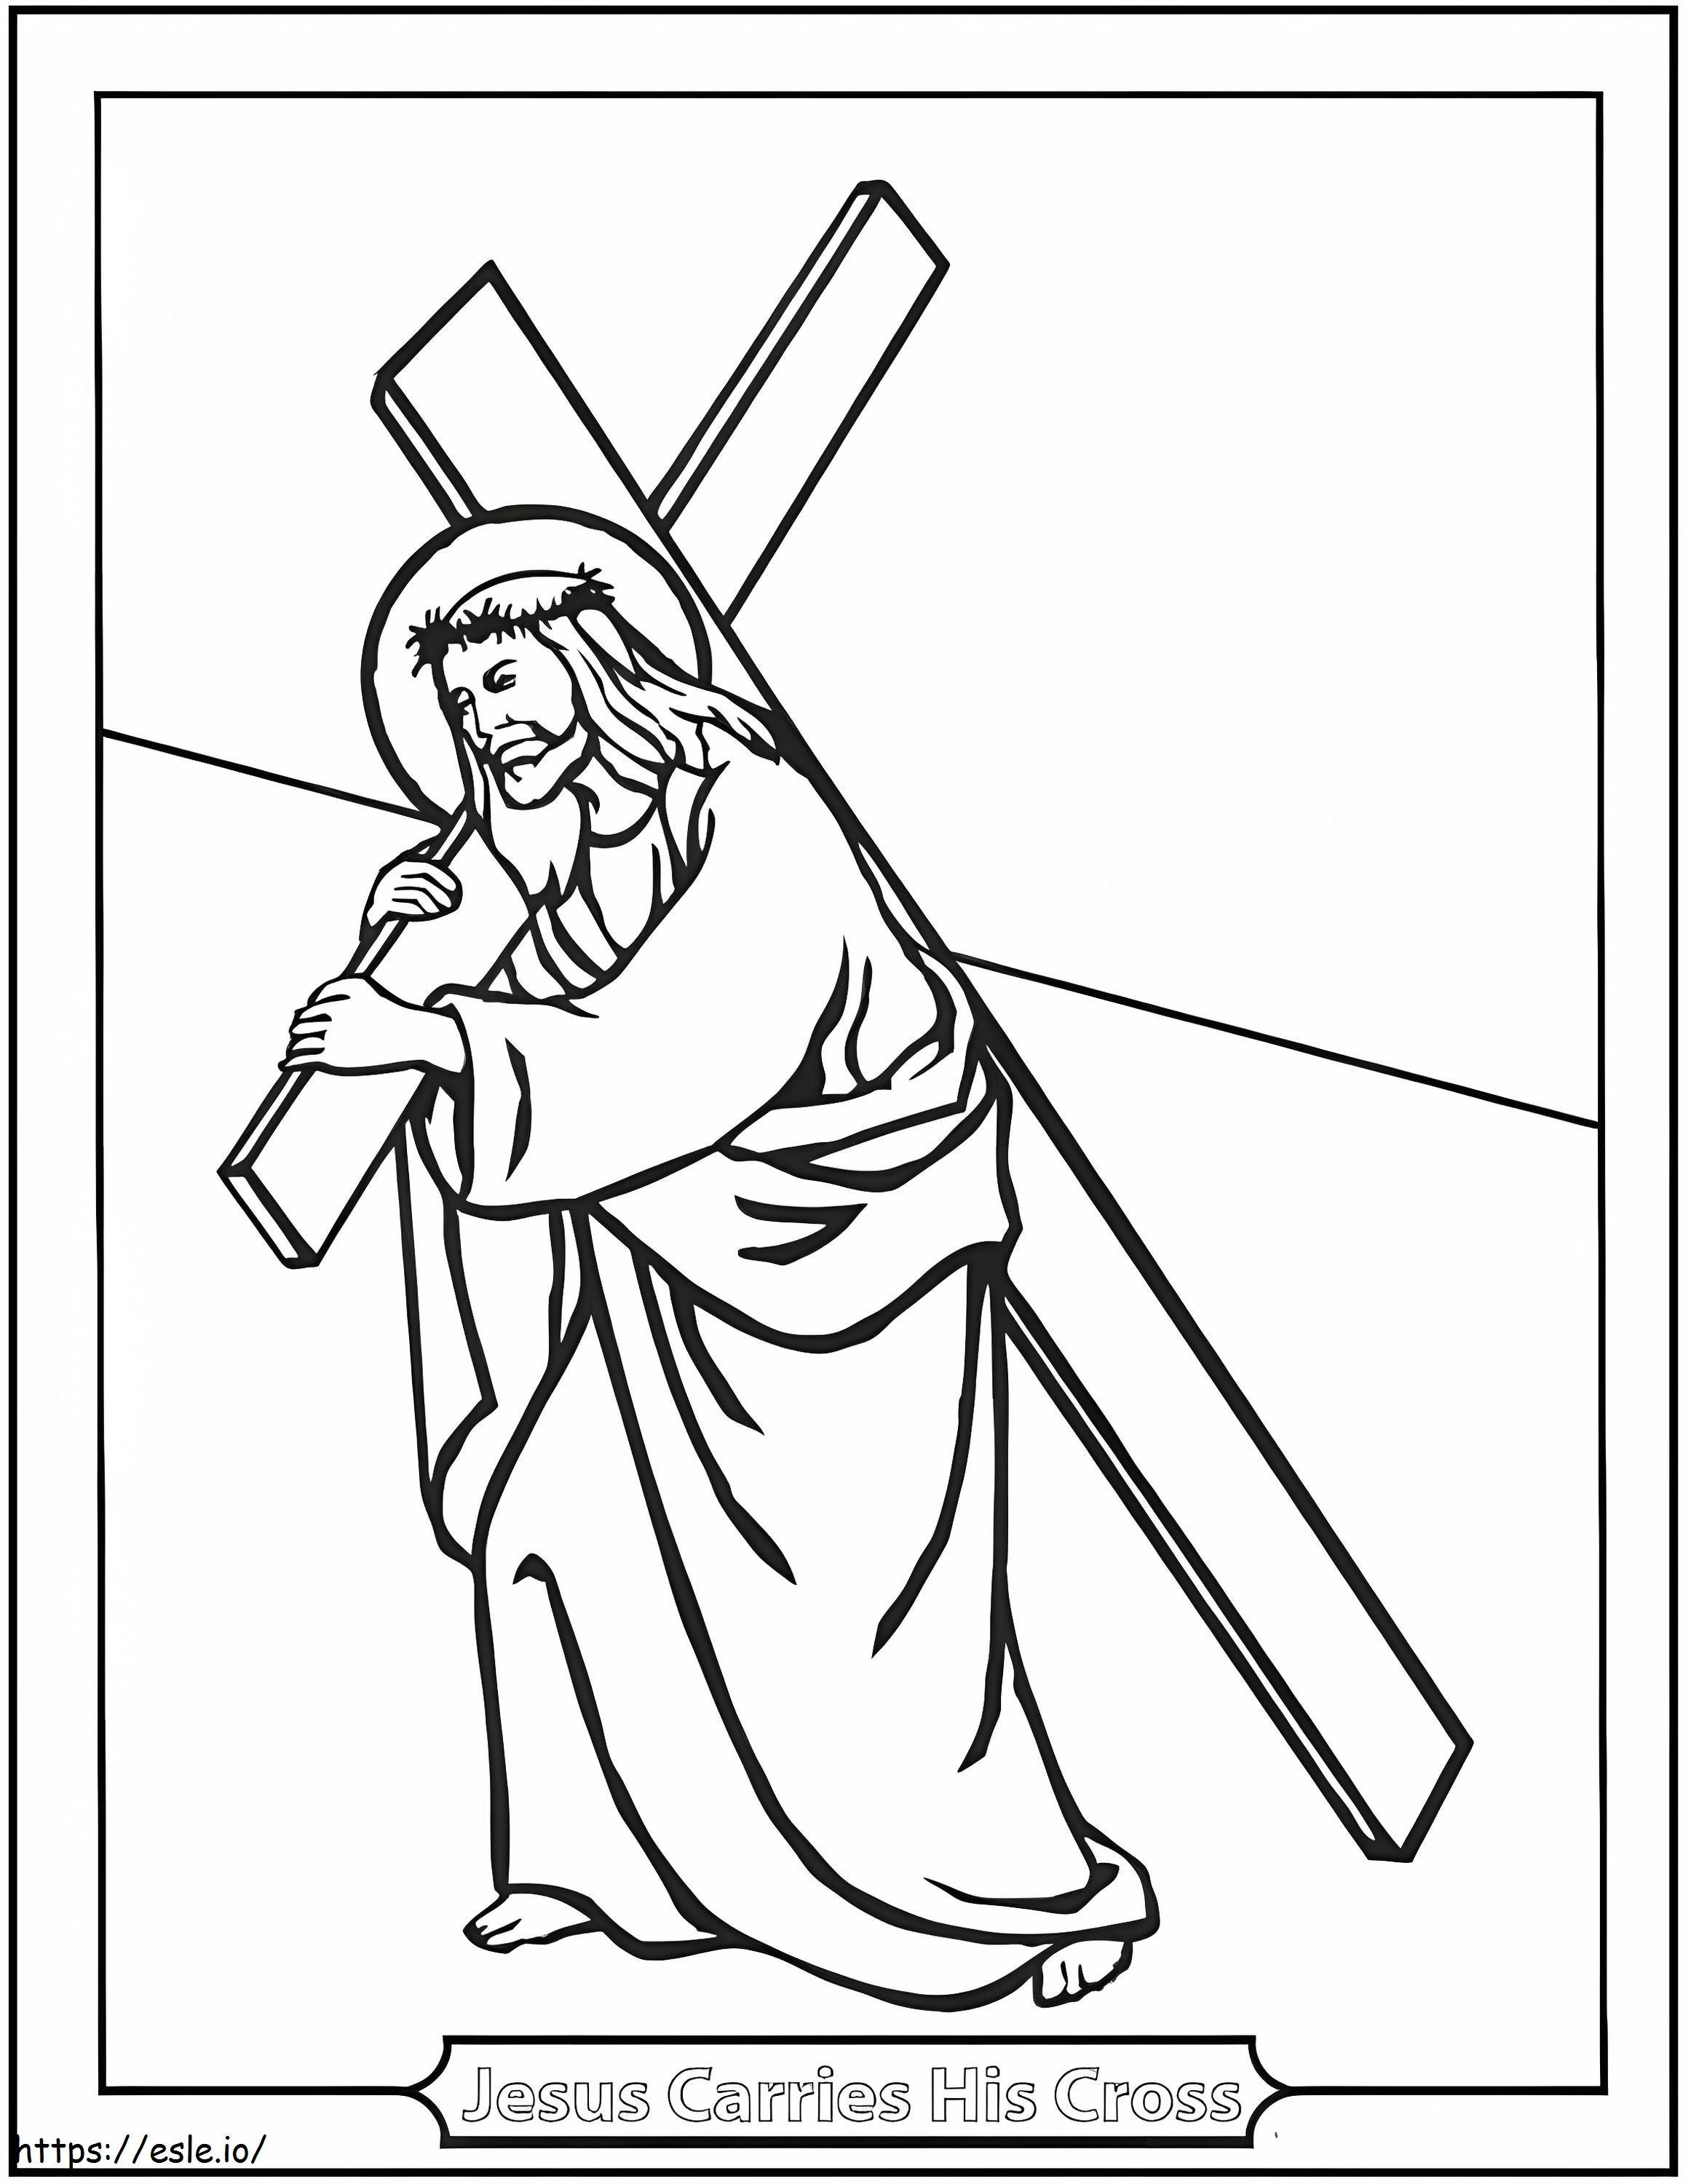 Jesus Good Friday coloring page